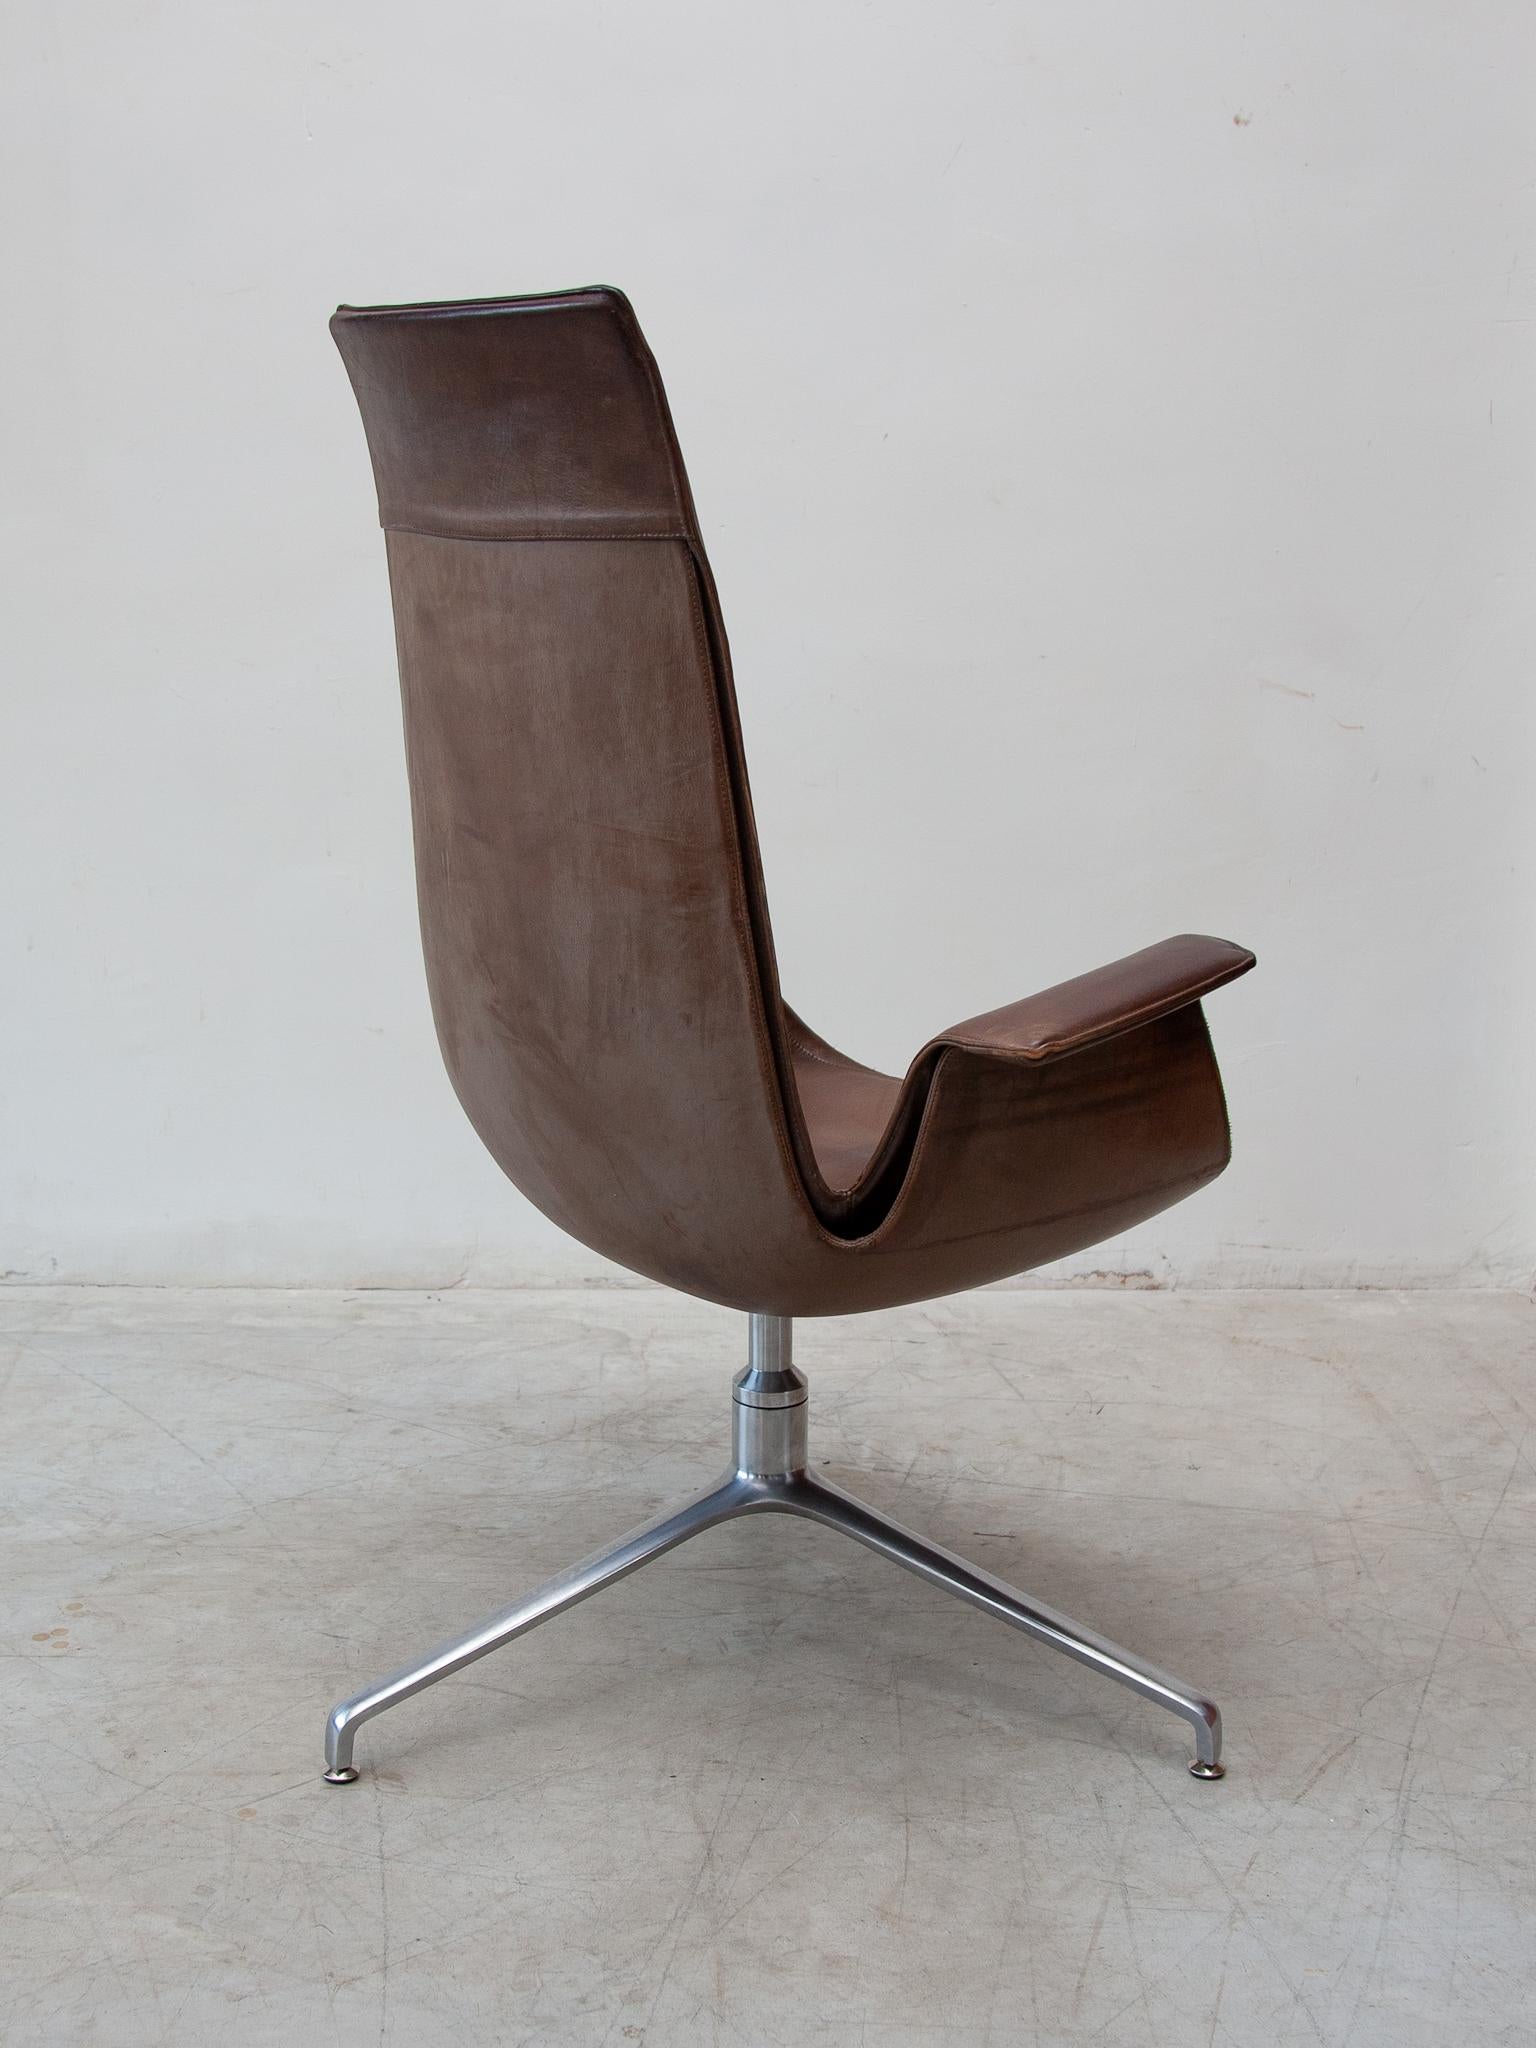 Fabricius & Kastholm FK6725 Desk, Lounge Chair in Brown Leather, Kill For Sale 5